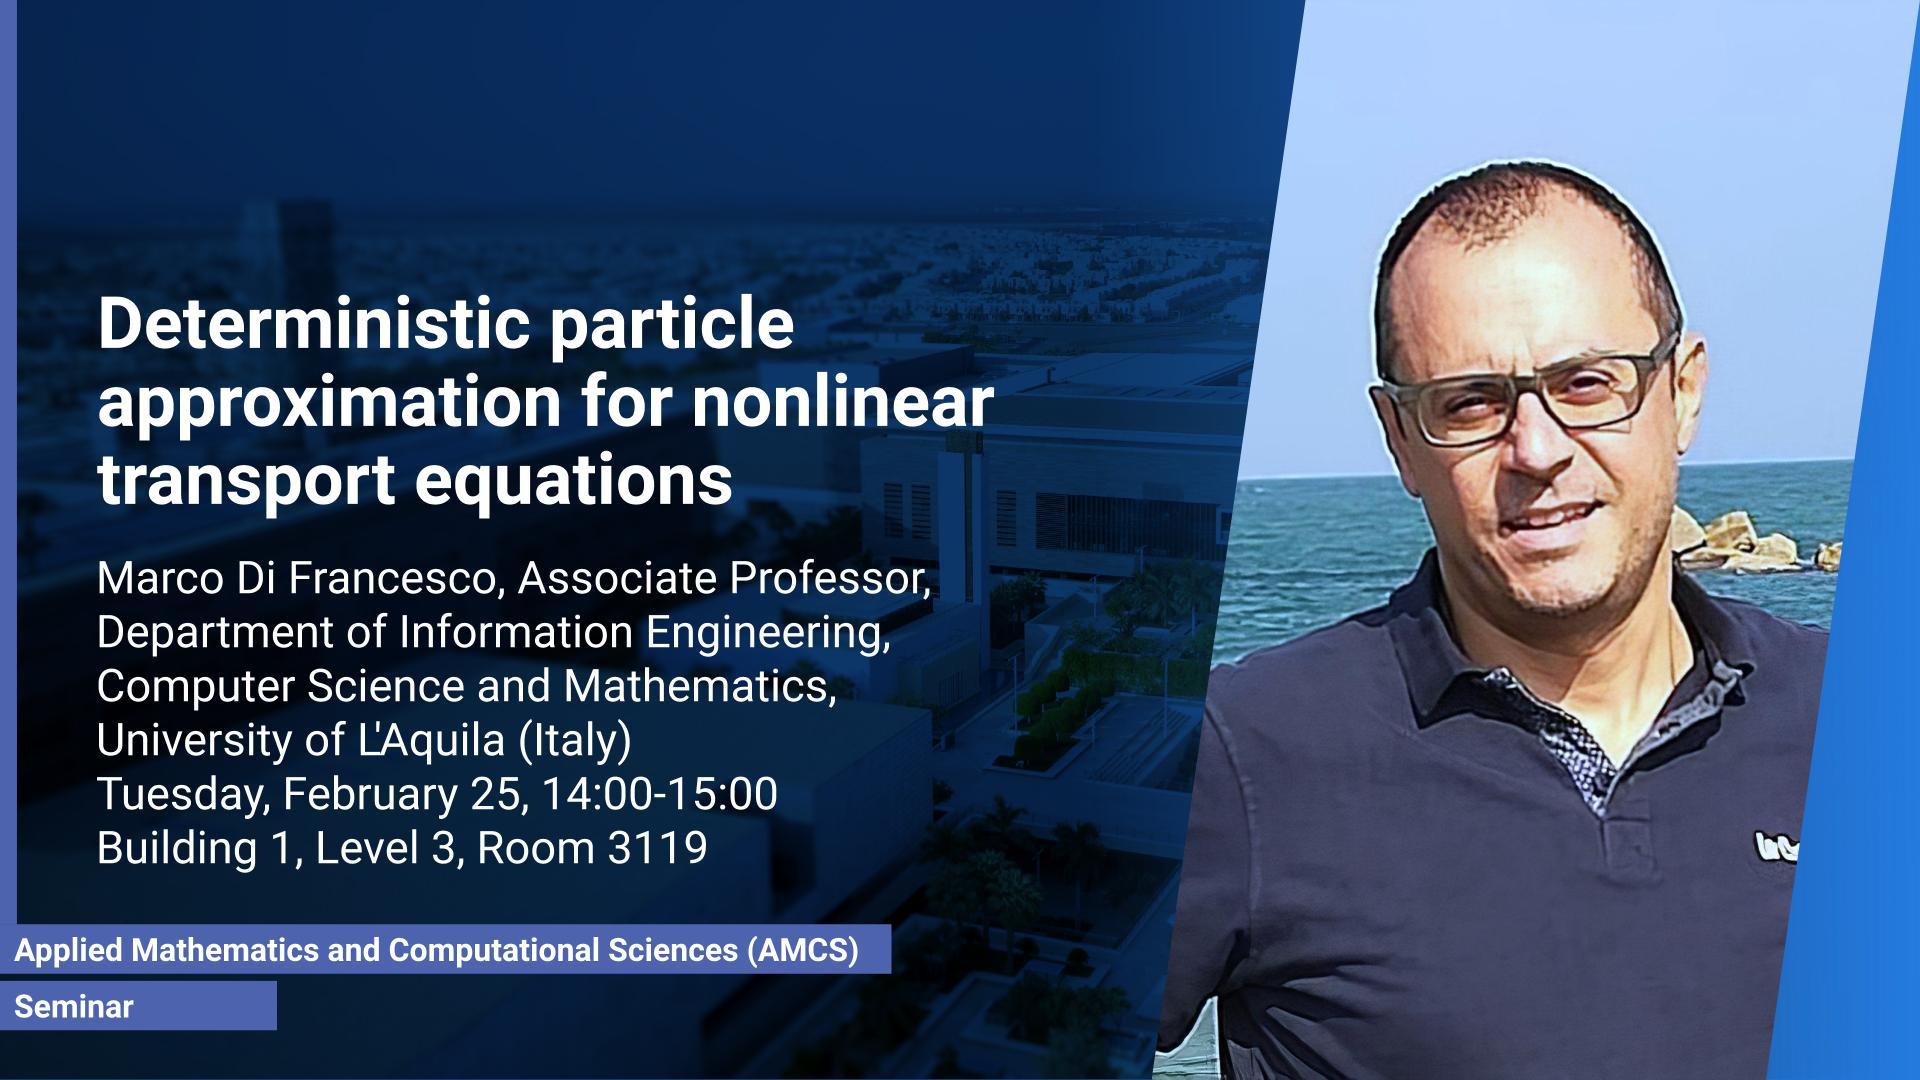 KAUST CEMSE AMCS Seminar Marco di Francesco Deterministic particle approximation for nonlinear transport equations